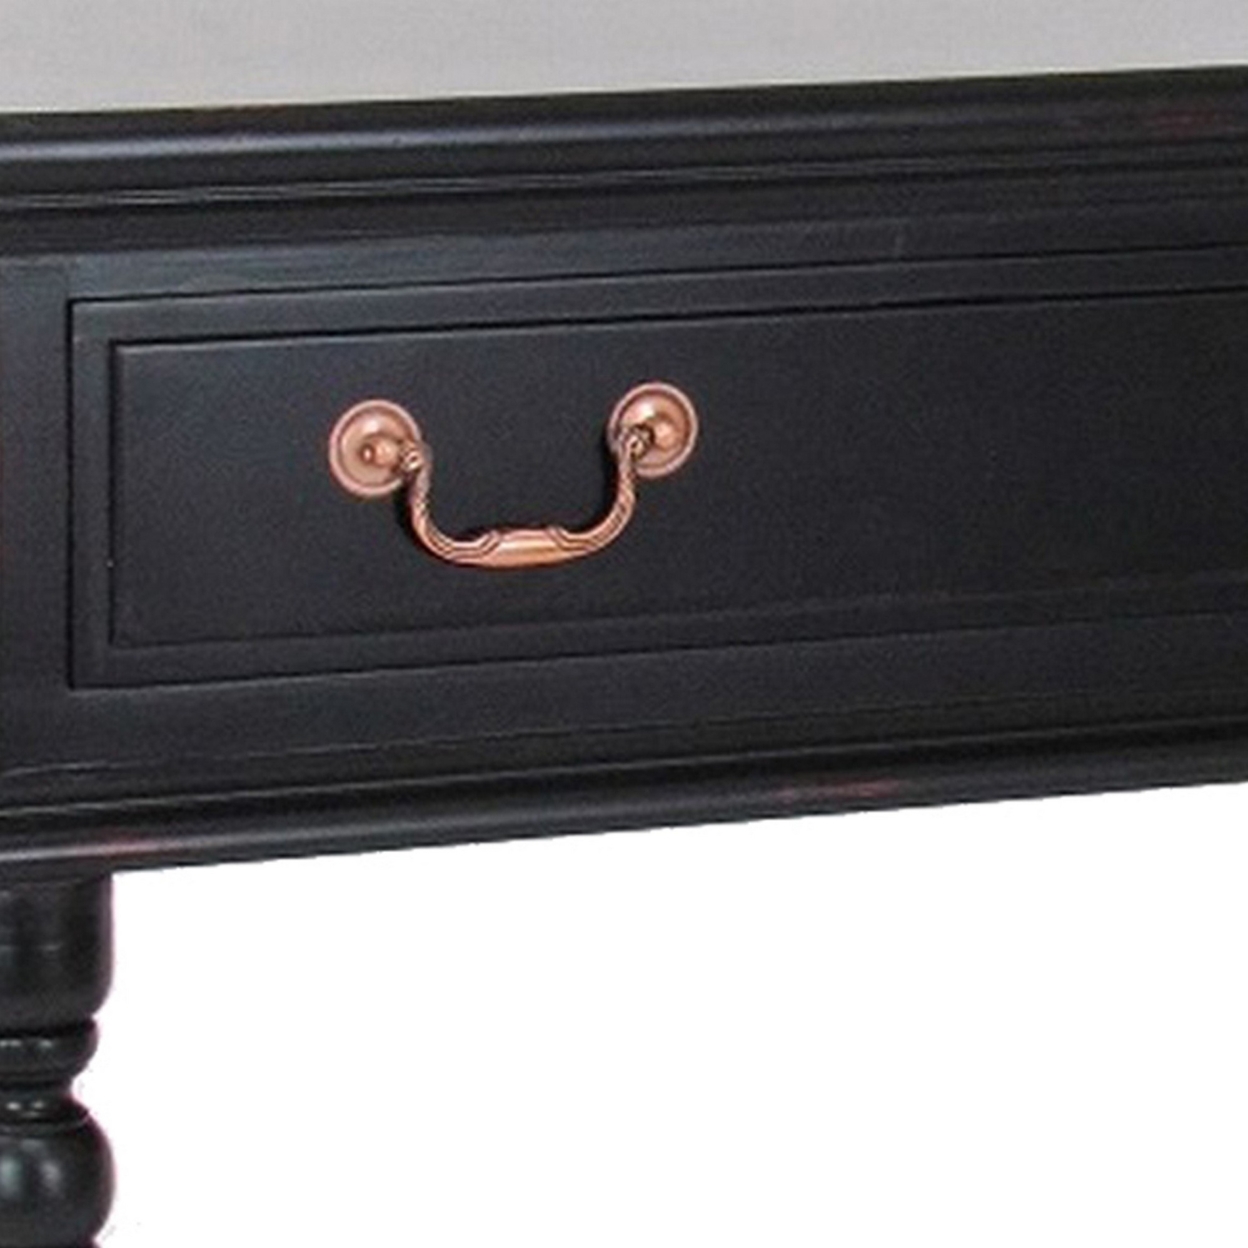 Wooden Sideboard With 1 Drawer And Turned Legs, Black- Saltoro Sherpi